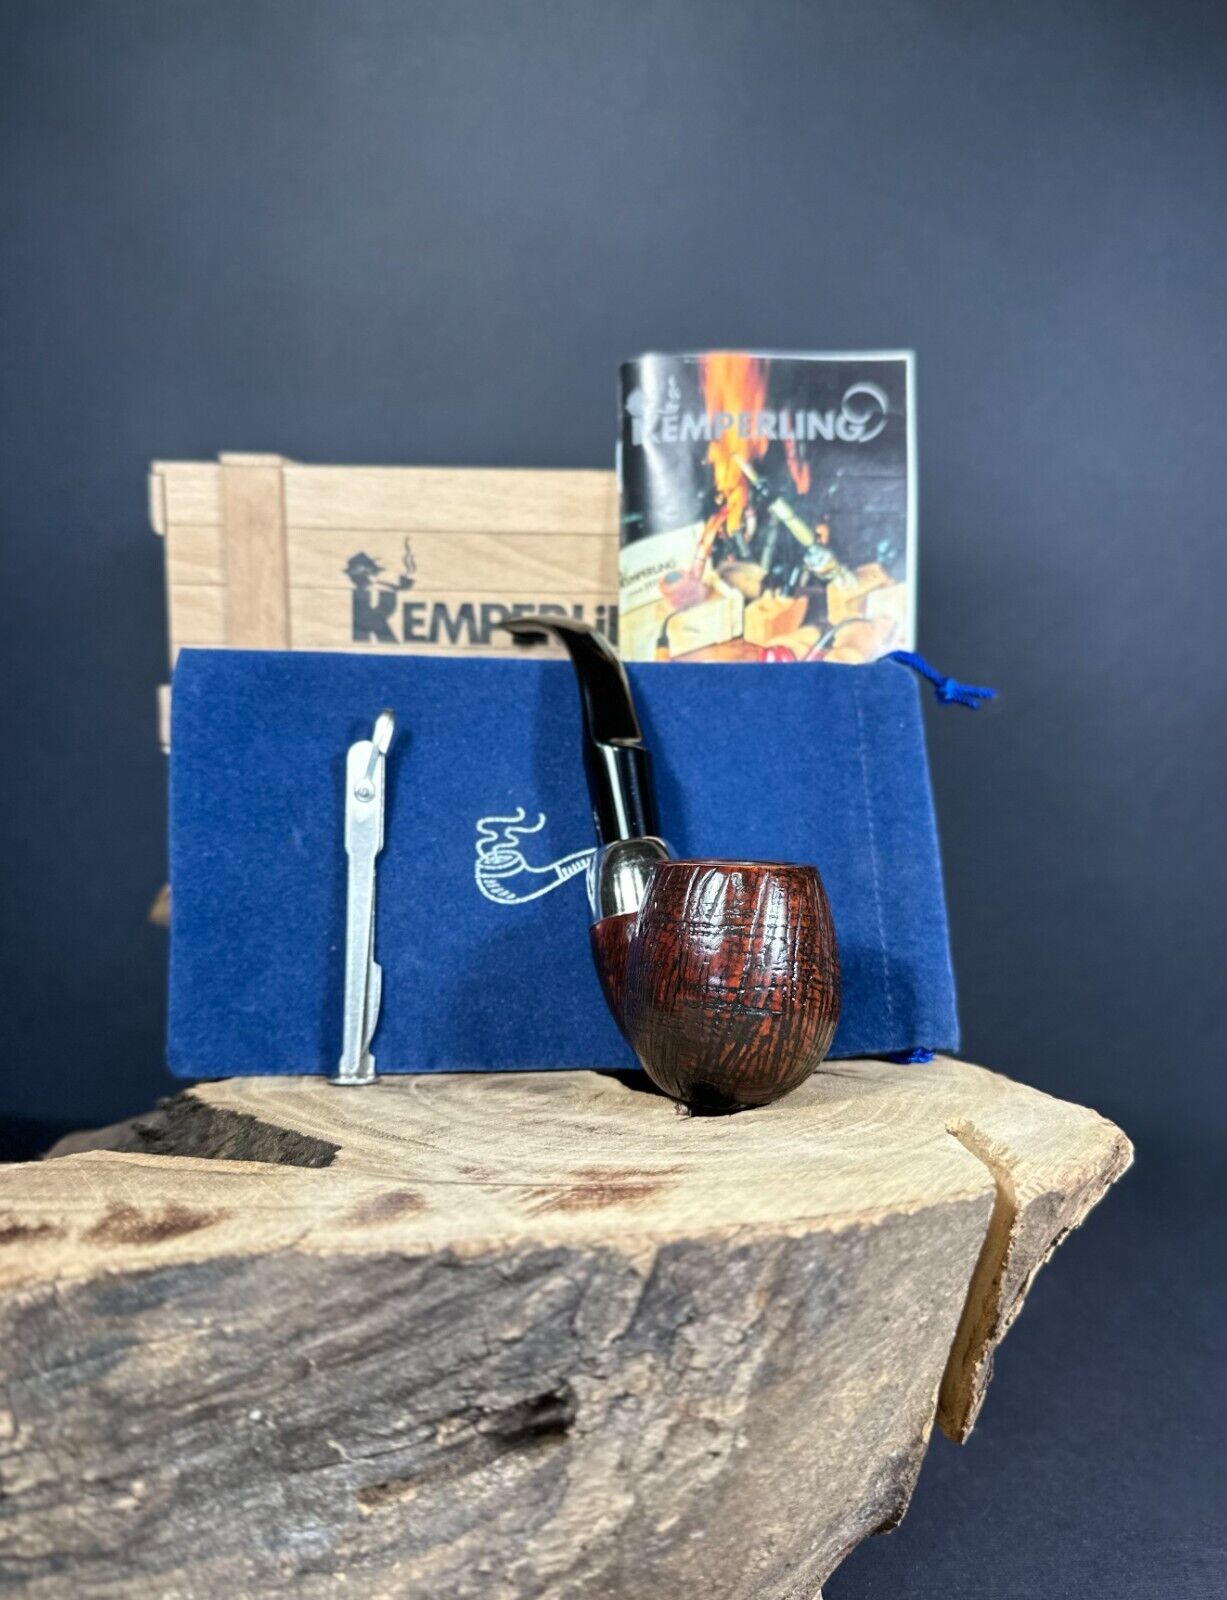 Kemperling Handmade Bent Apple Shaped Smoking Pipe With Box And Reamer